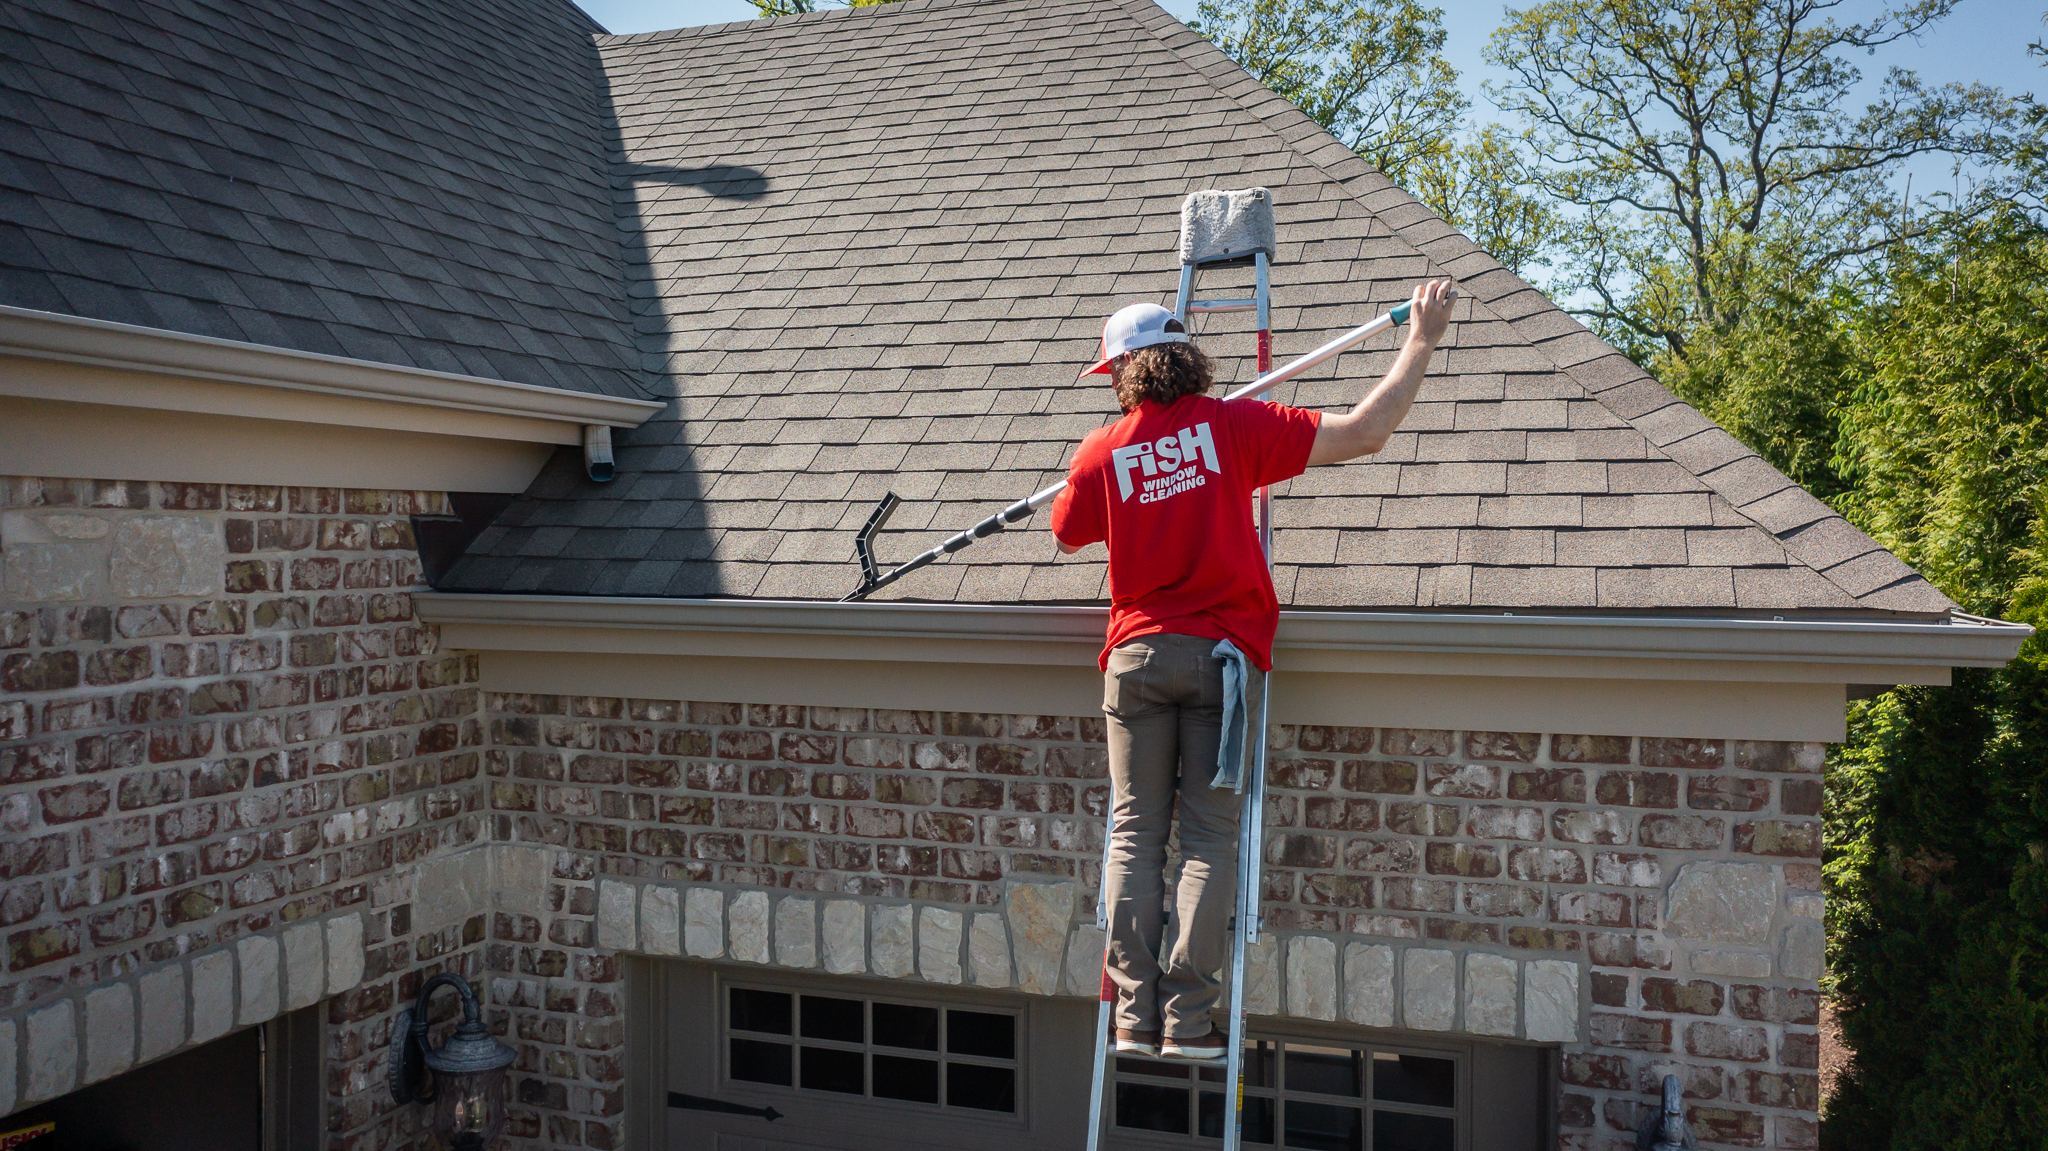 Gleam Team Exterior Cleaning Gutter Cleaning Company Near Me San Antonio Tx